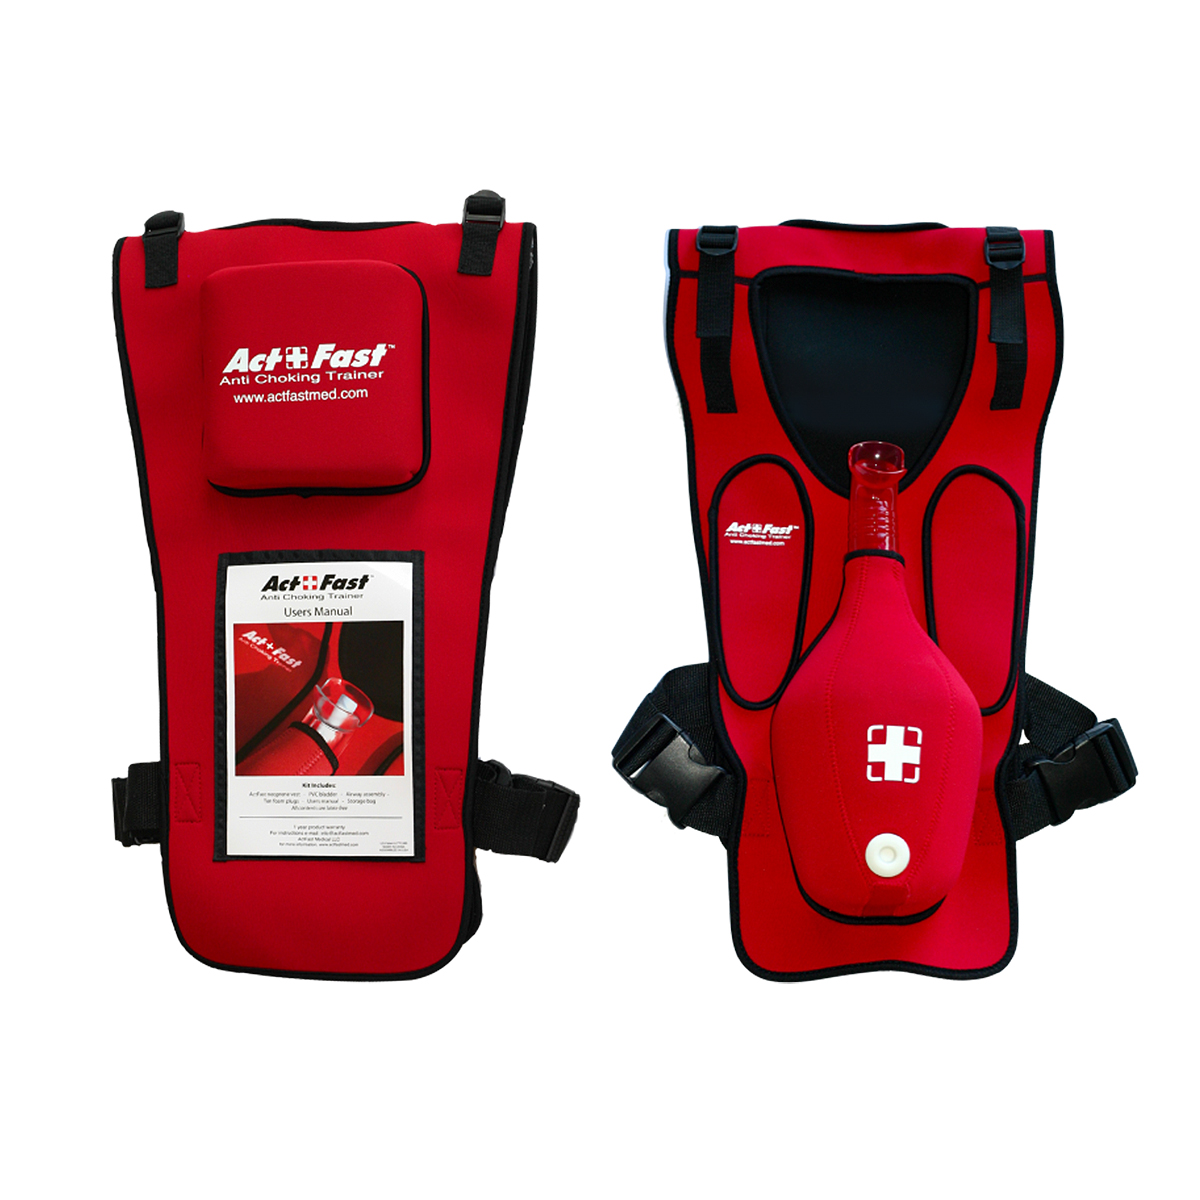 Act+Fast Rescue Choking Vest - Red with Slap Back - 1014589